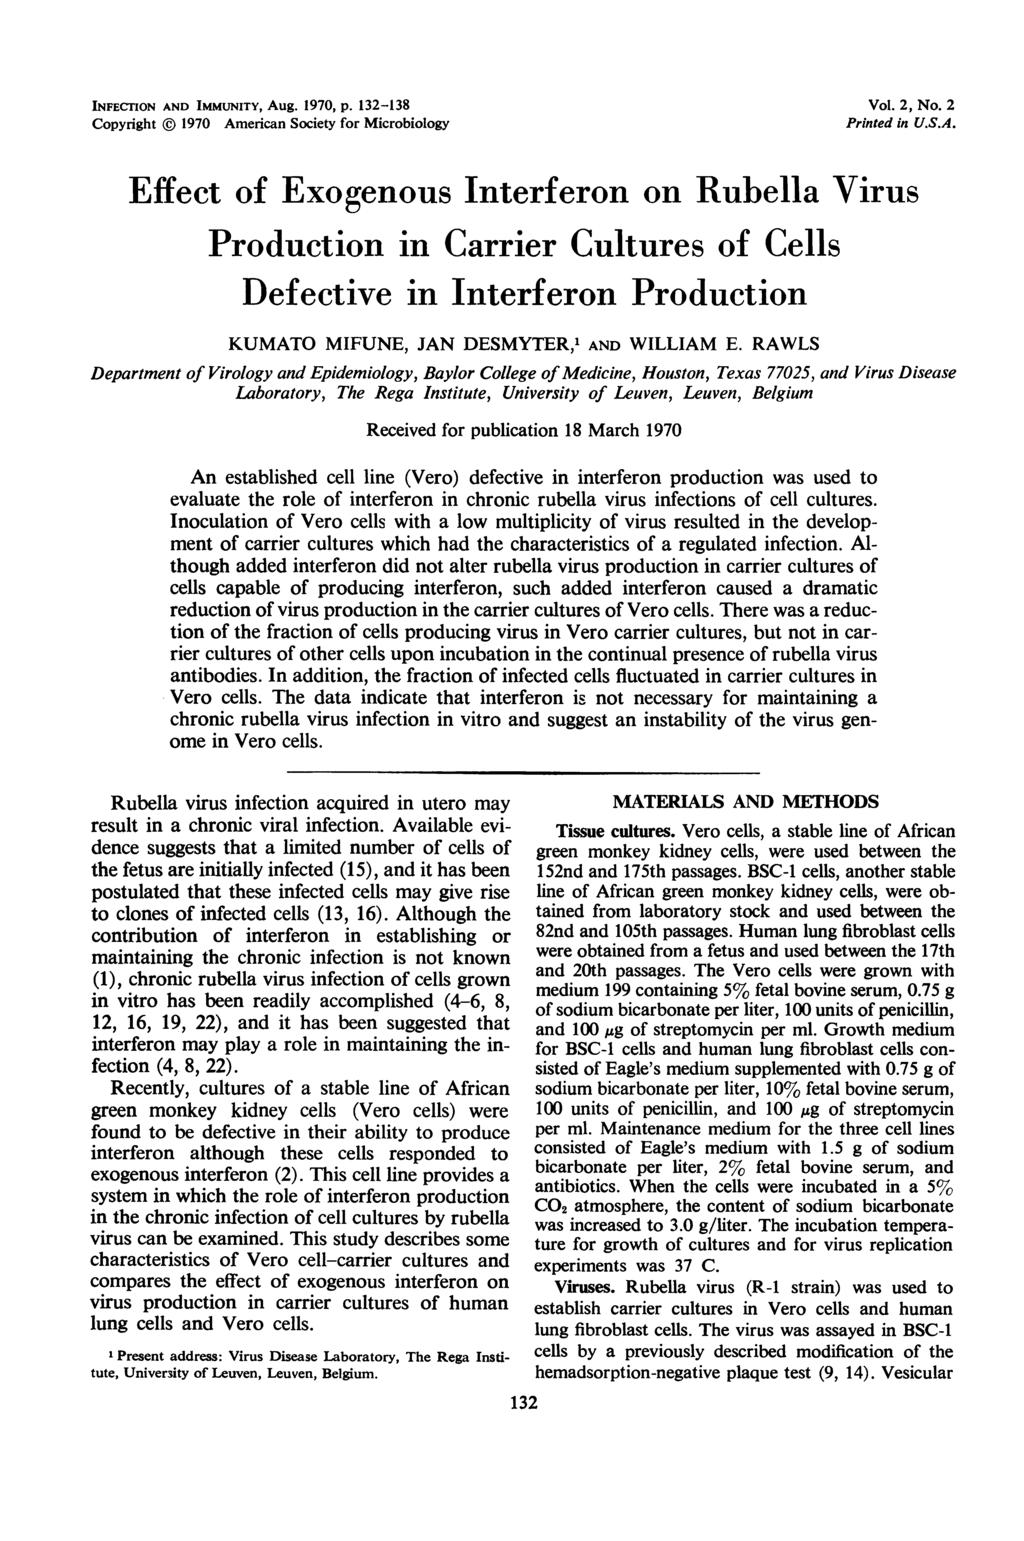 INFECTION AND IMMUNITY, Aug. 1970, p. 132-138 Copyright 1970 American Society for Microbiology Vol. 2, No. 2 Printed in U.S.A. Effect of Exogenous Interferon on Rubella Virus Production in Carrier Cultures of Cells Defective in Interferon Production KUMATO MIFUNE, JAN DESMYTER,1 AND WILLIAM E.